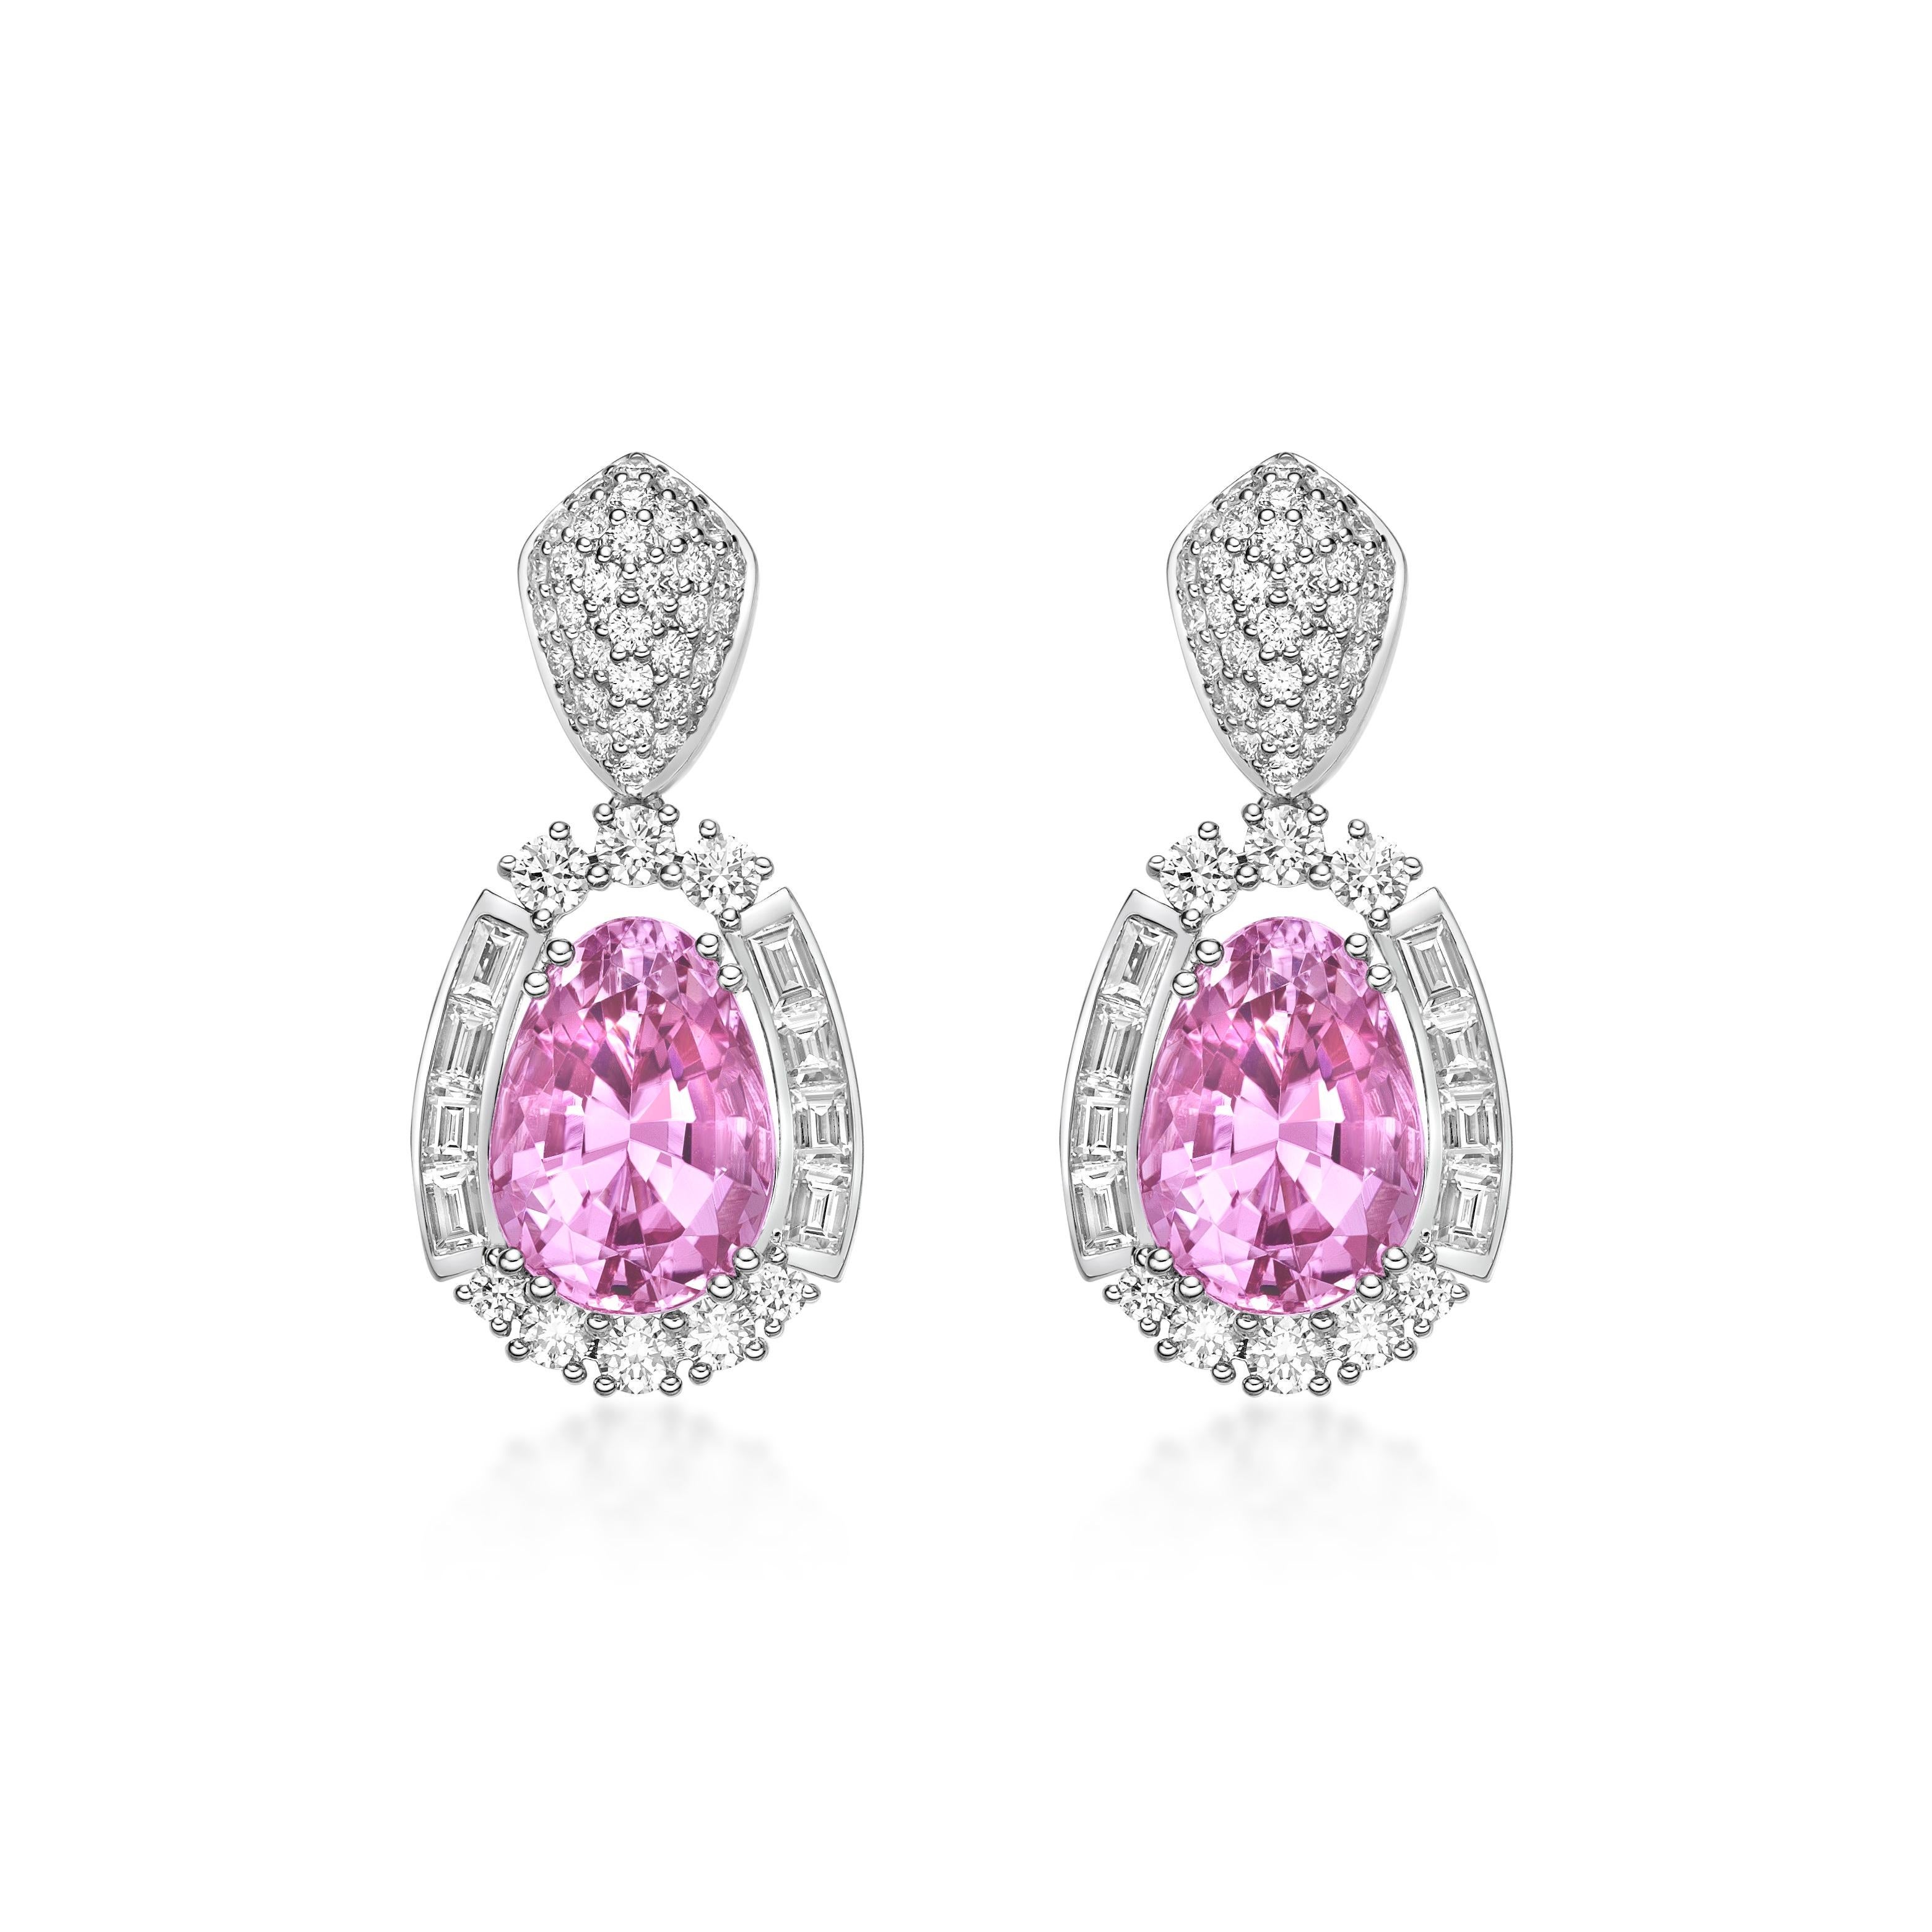 Contemporary 11.19 Carat Pink Tourmaline Drop Earrings in 18Karat White Gold with Diamond. For Sale